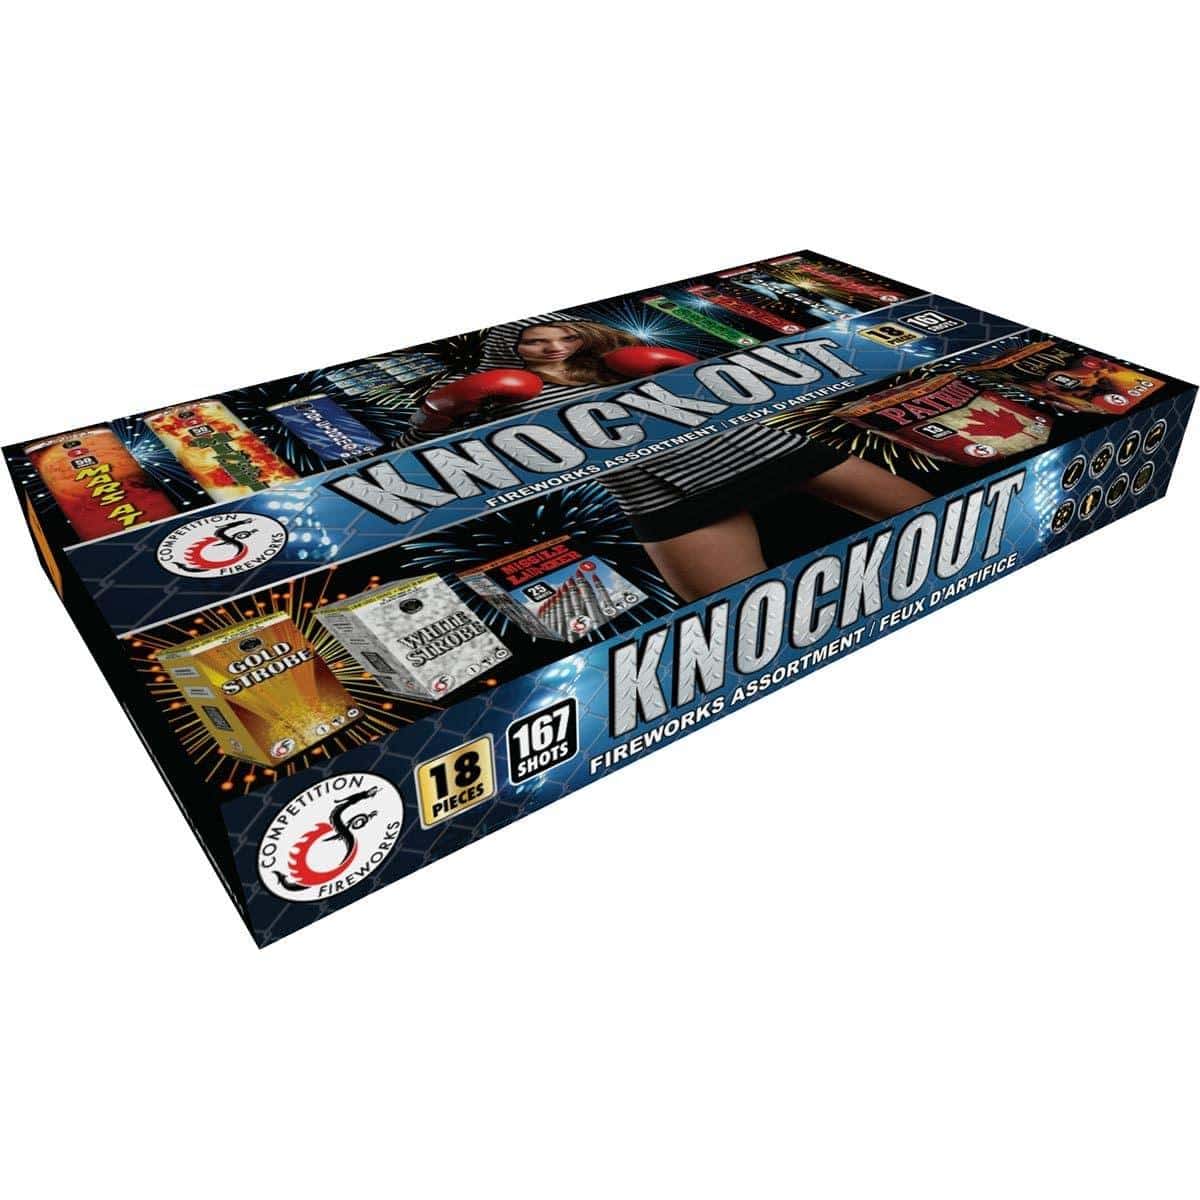 Buy Fireworks Knockout Fireworks sold at Party Expert